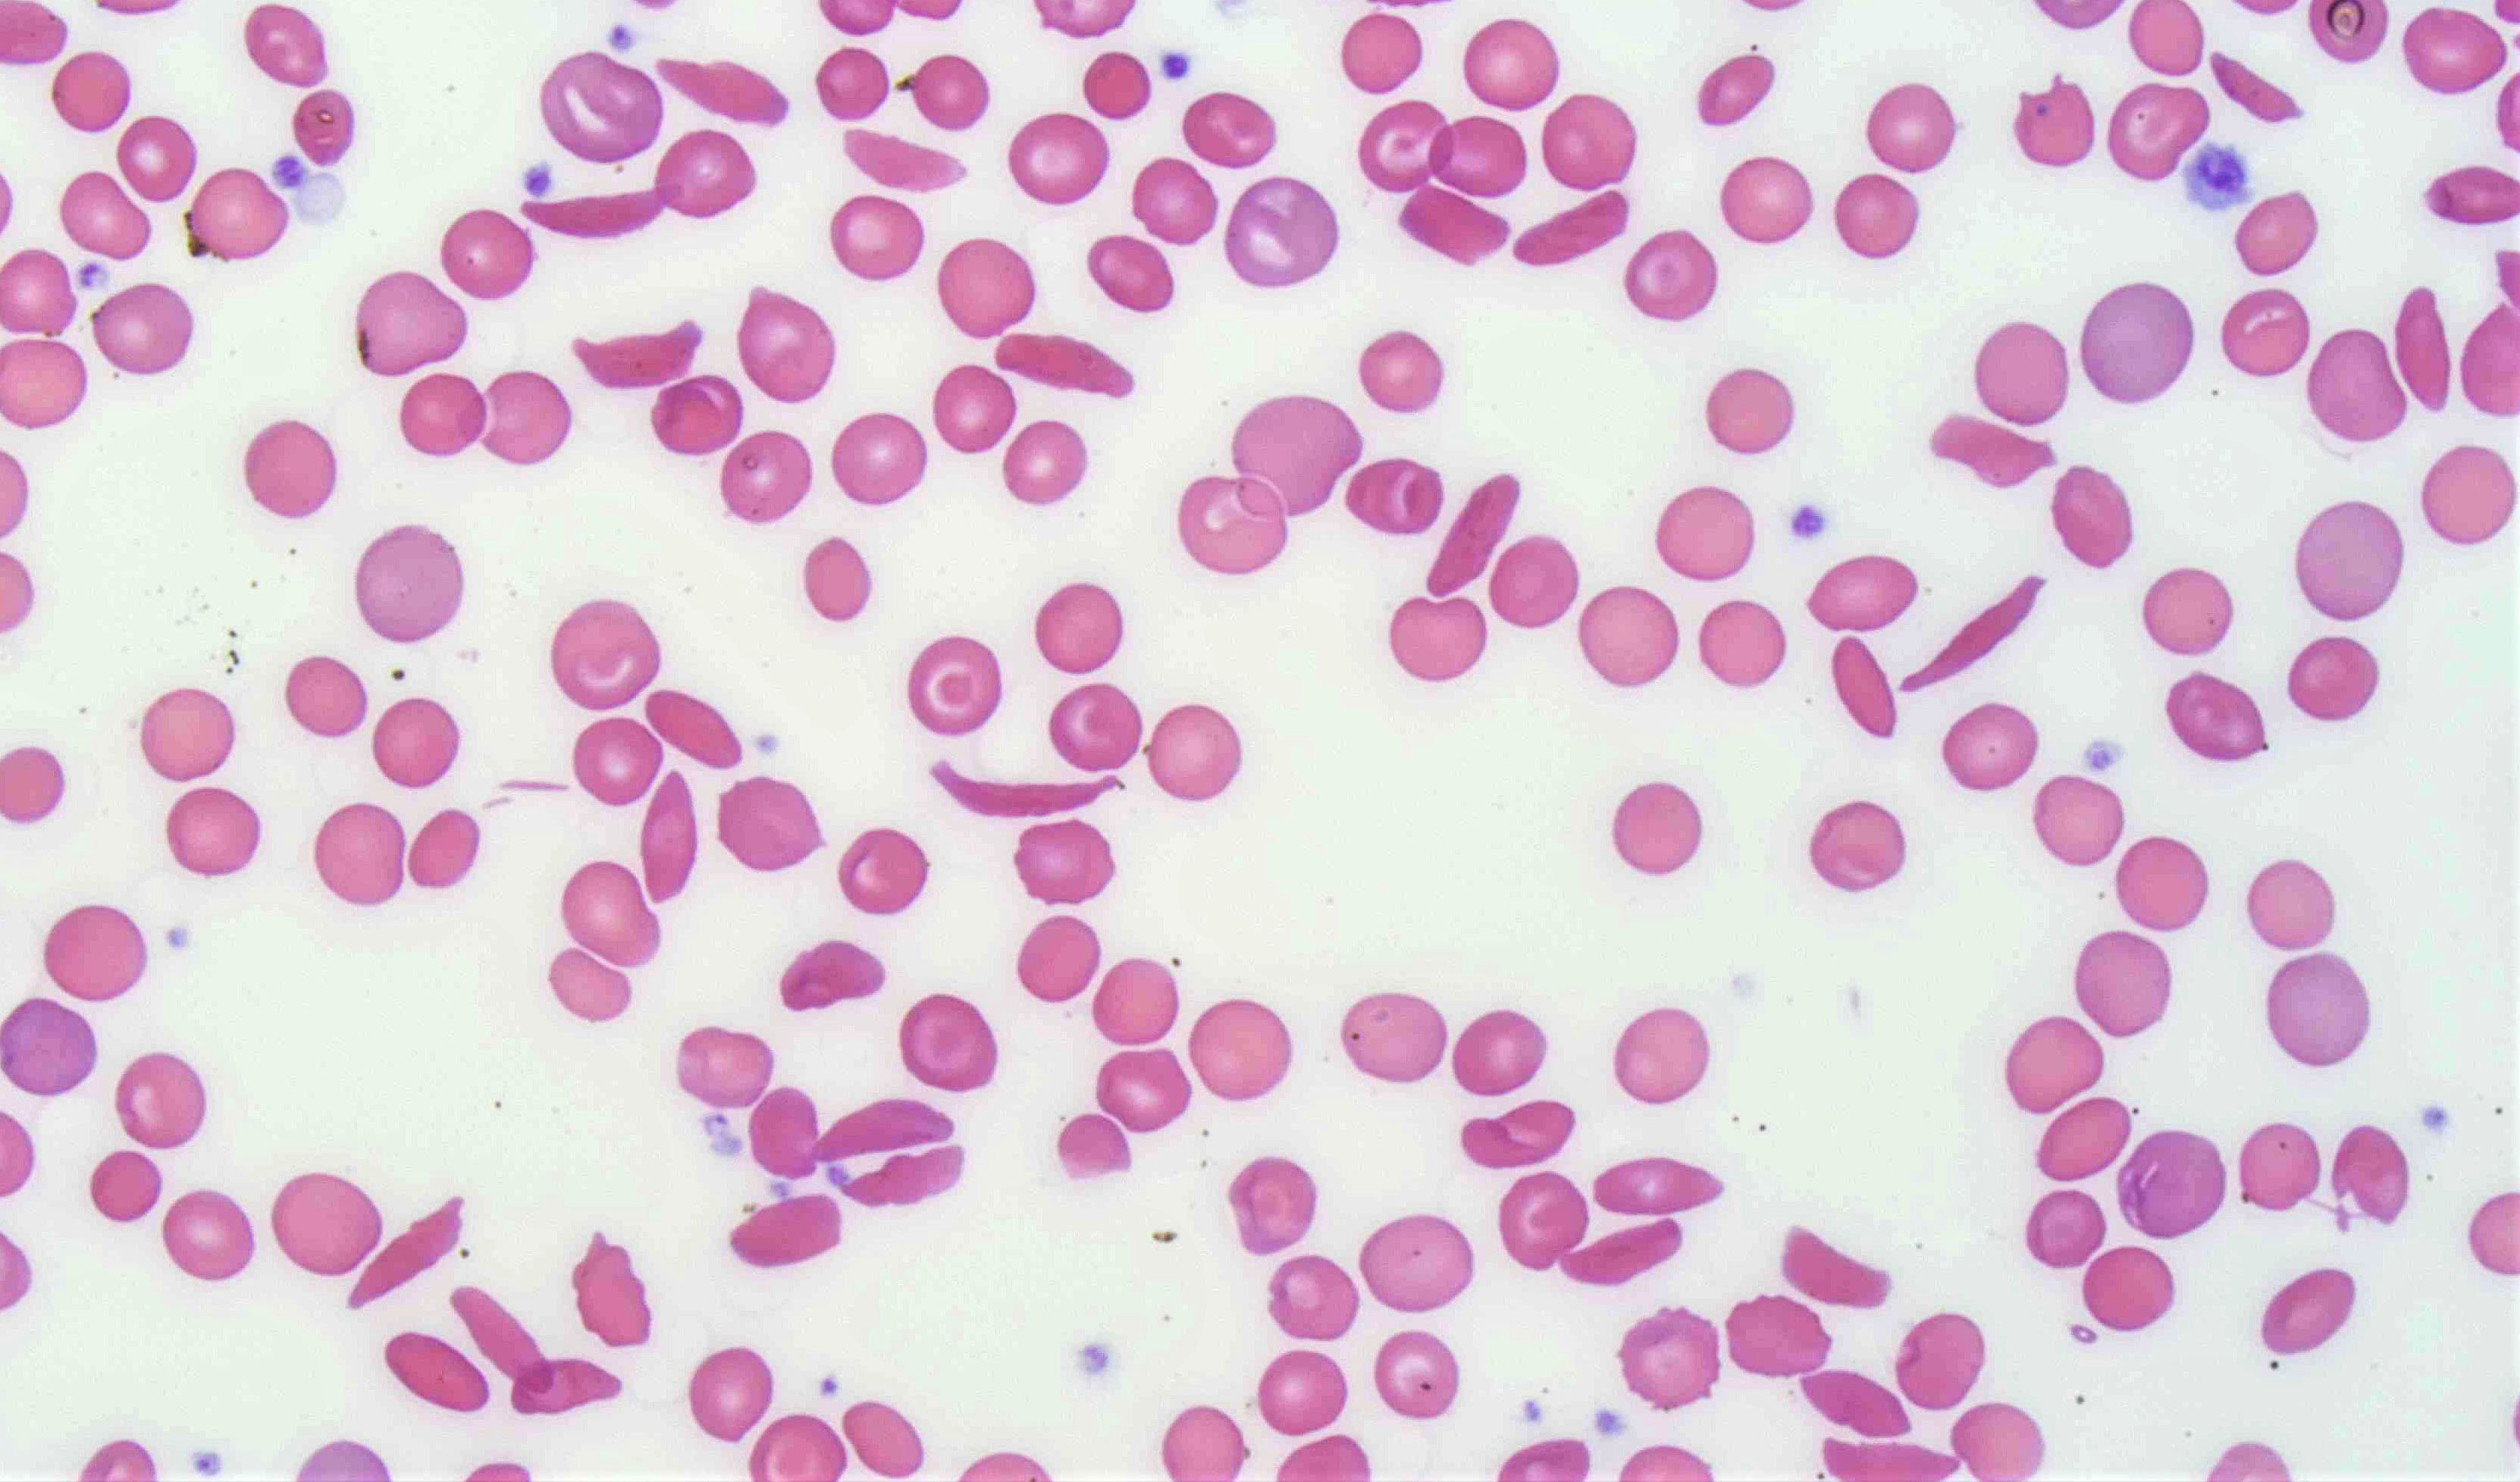 Sickle cell blood smear